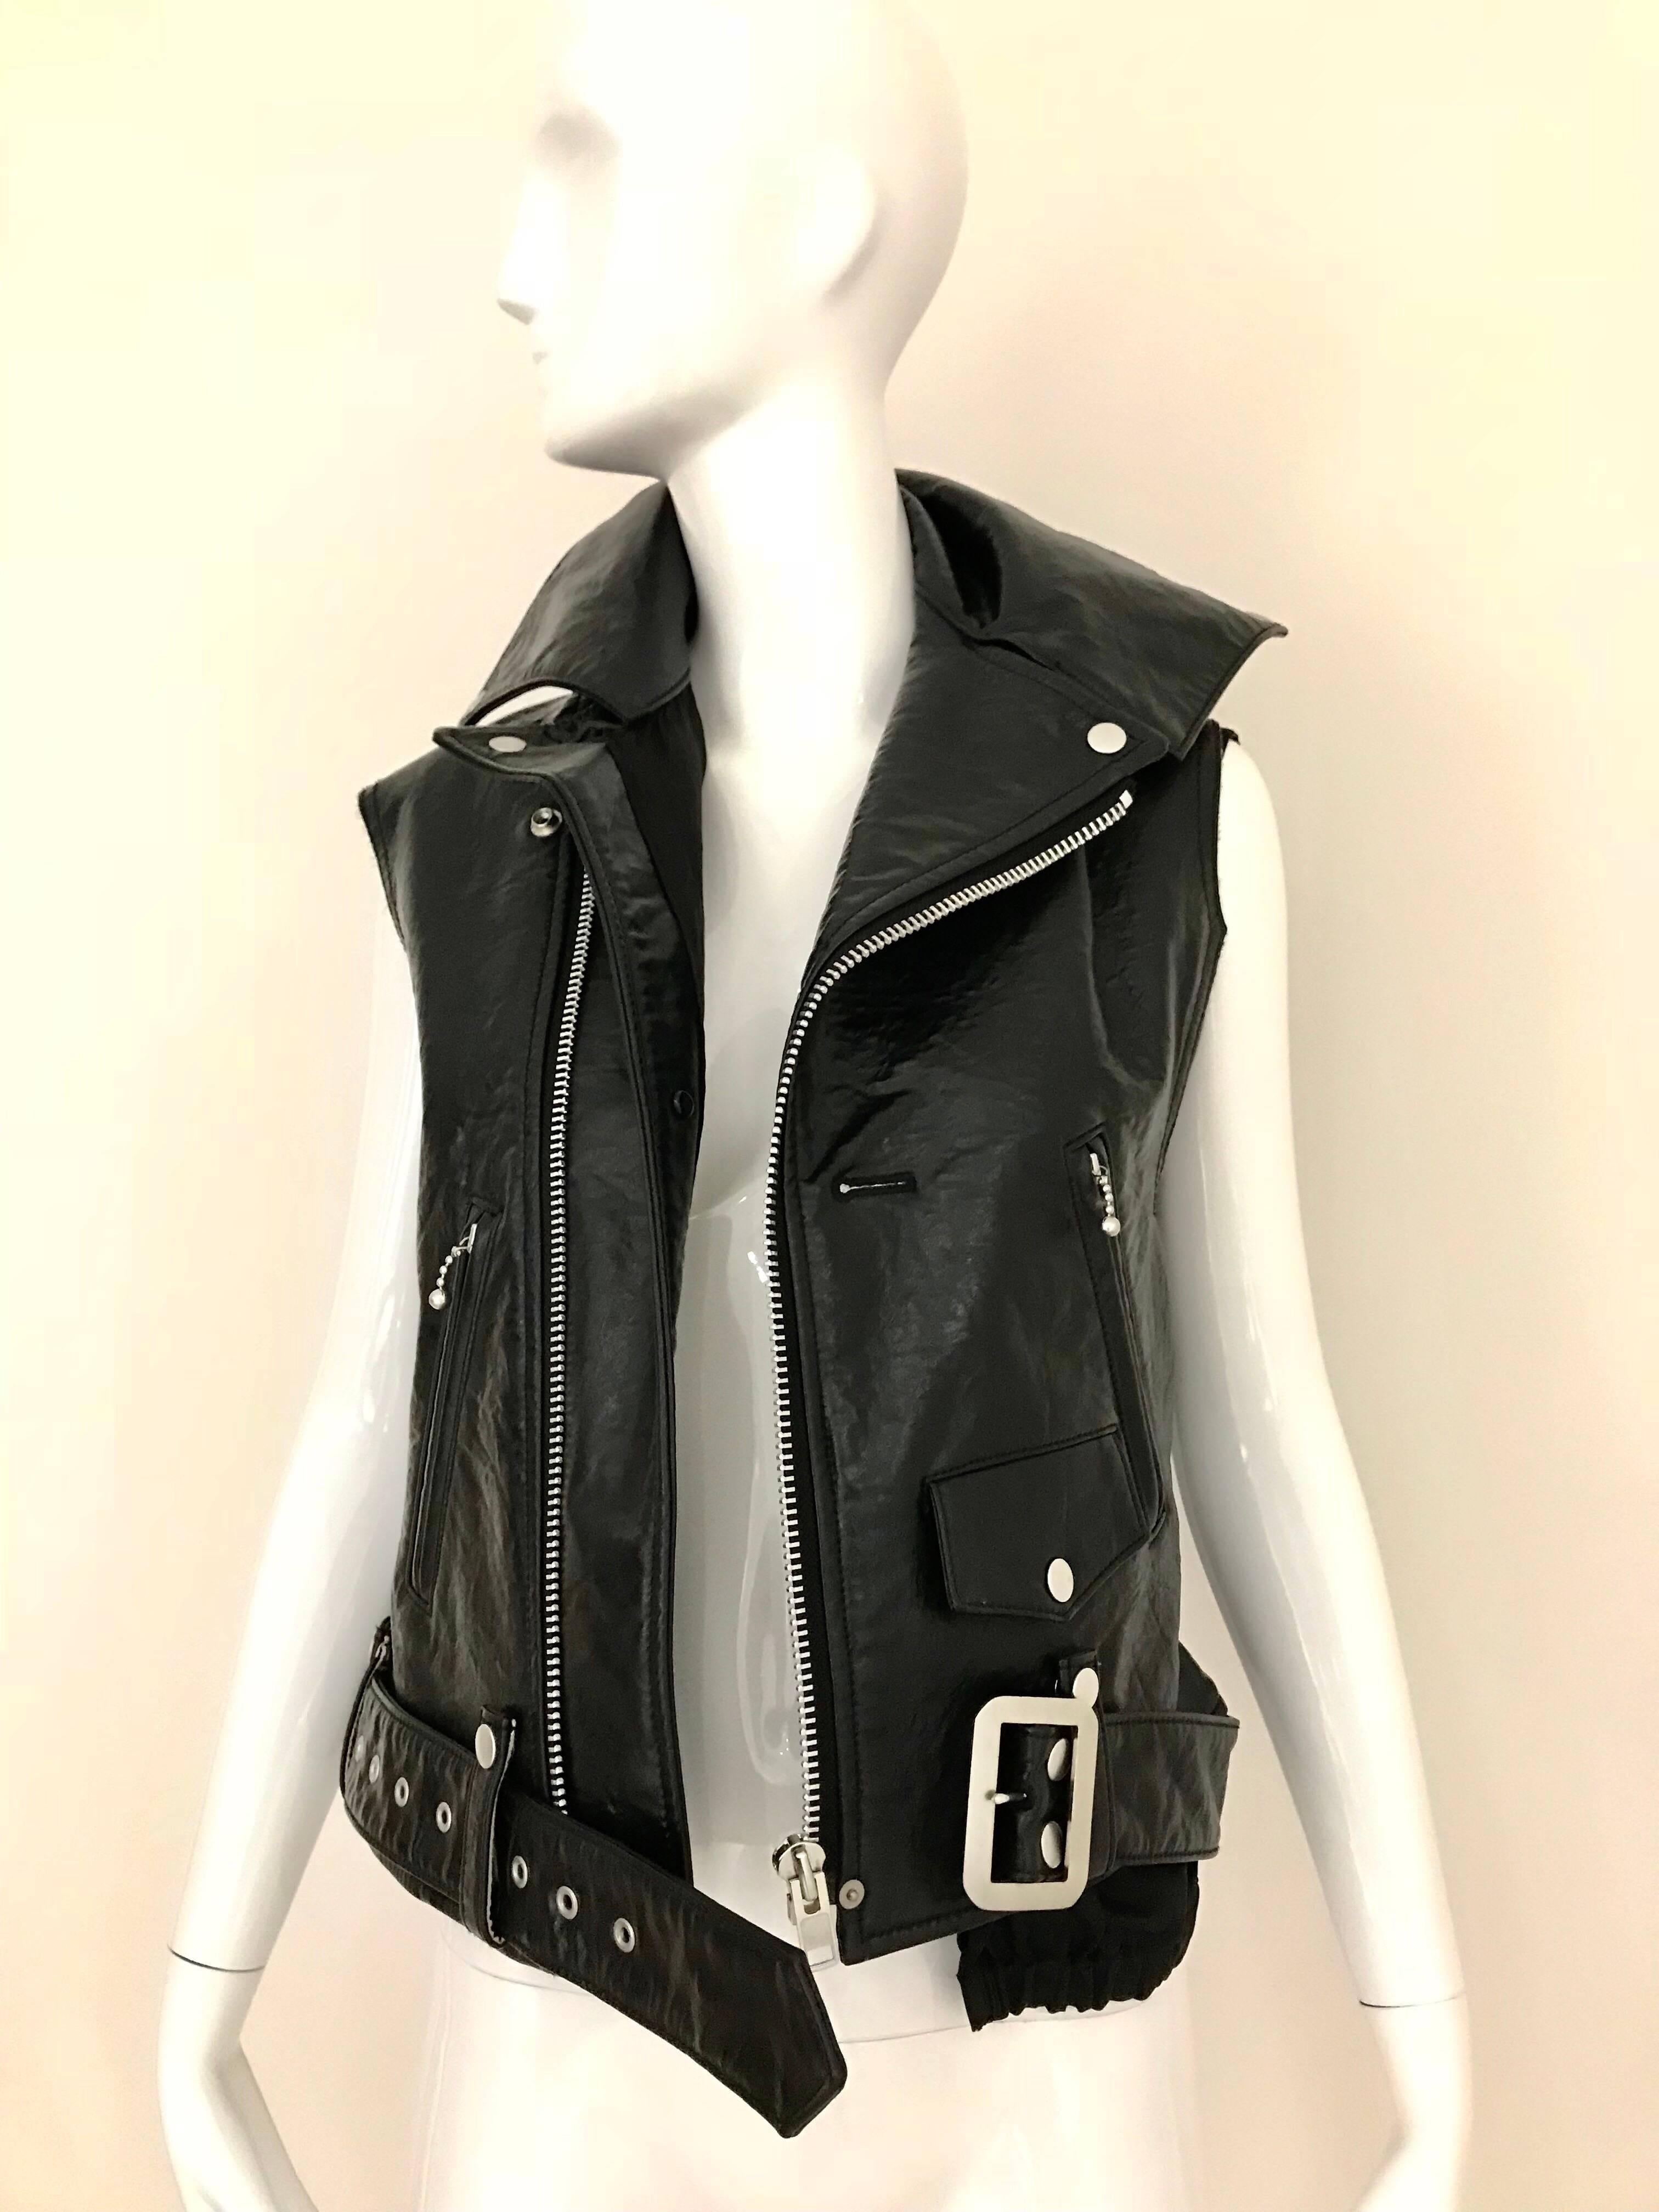 Junya Watanabe Comme des Garcons Avant Garde Black japaDeconstructed Leather Vest with zipper and belt.
Marked size: small. fit US 2/4/6